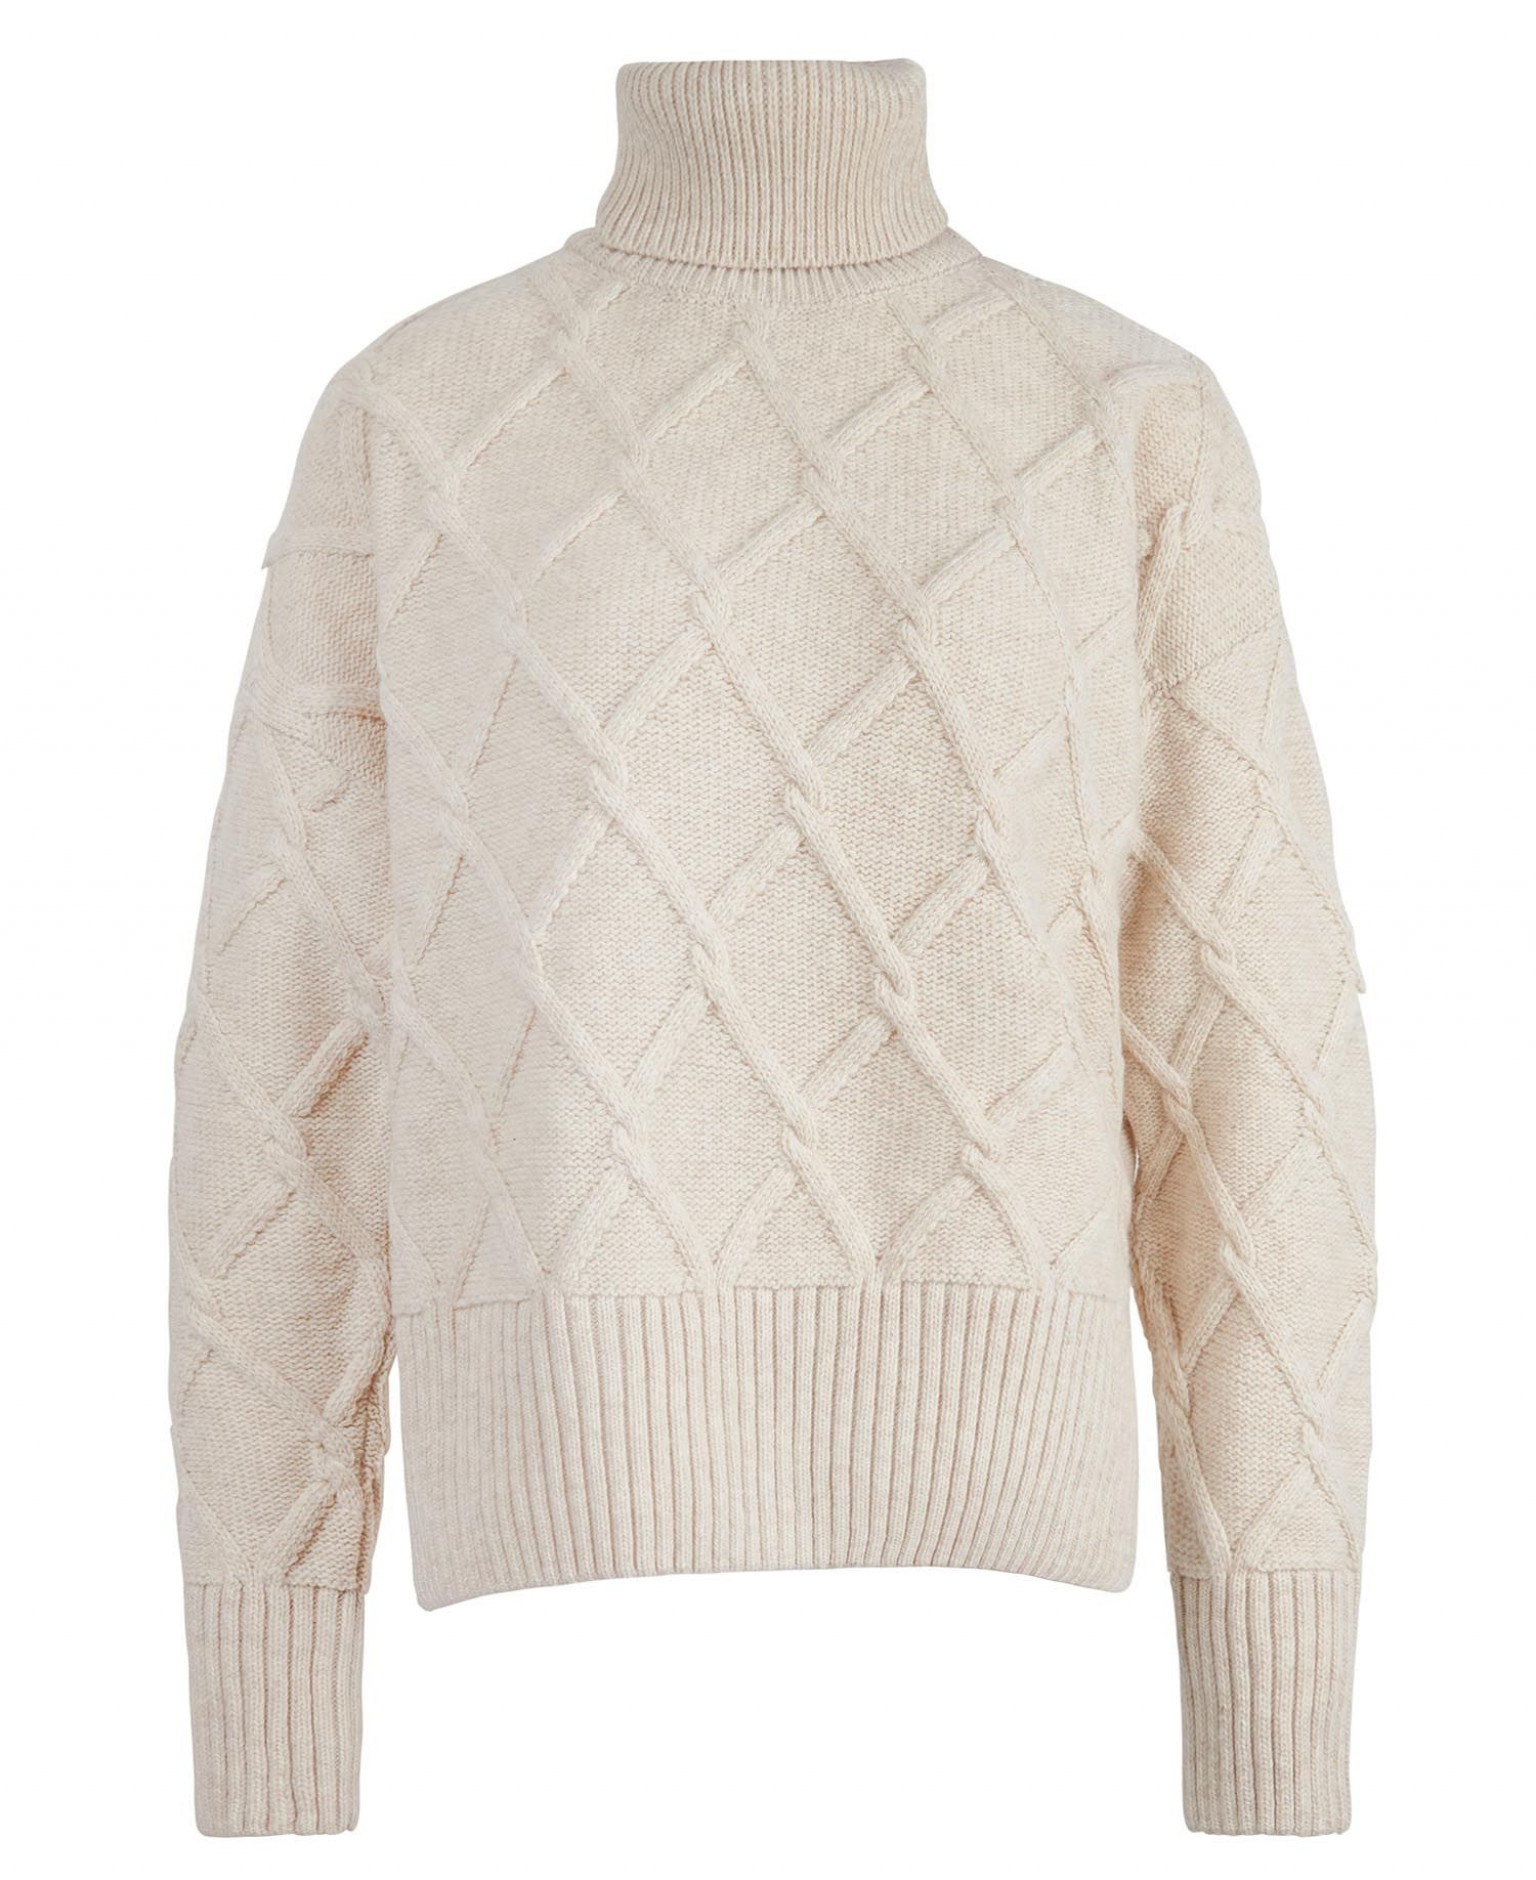 Barbour Perch Knit Oatmeal